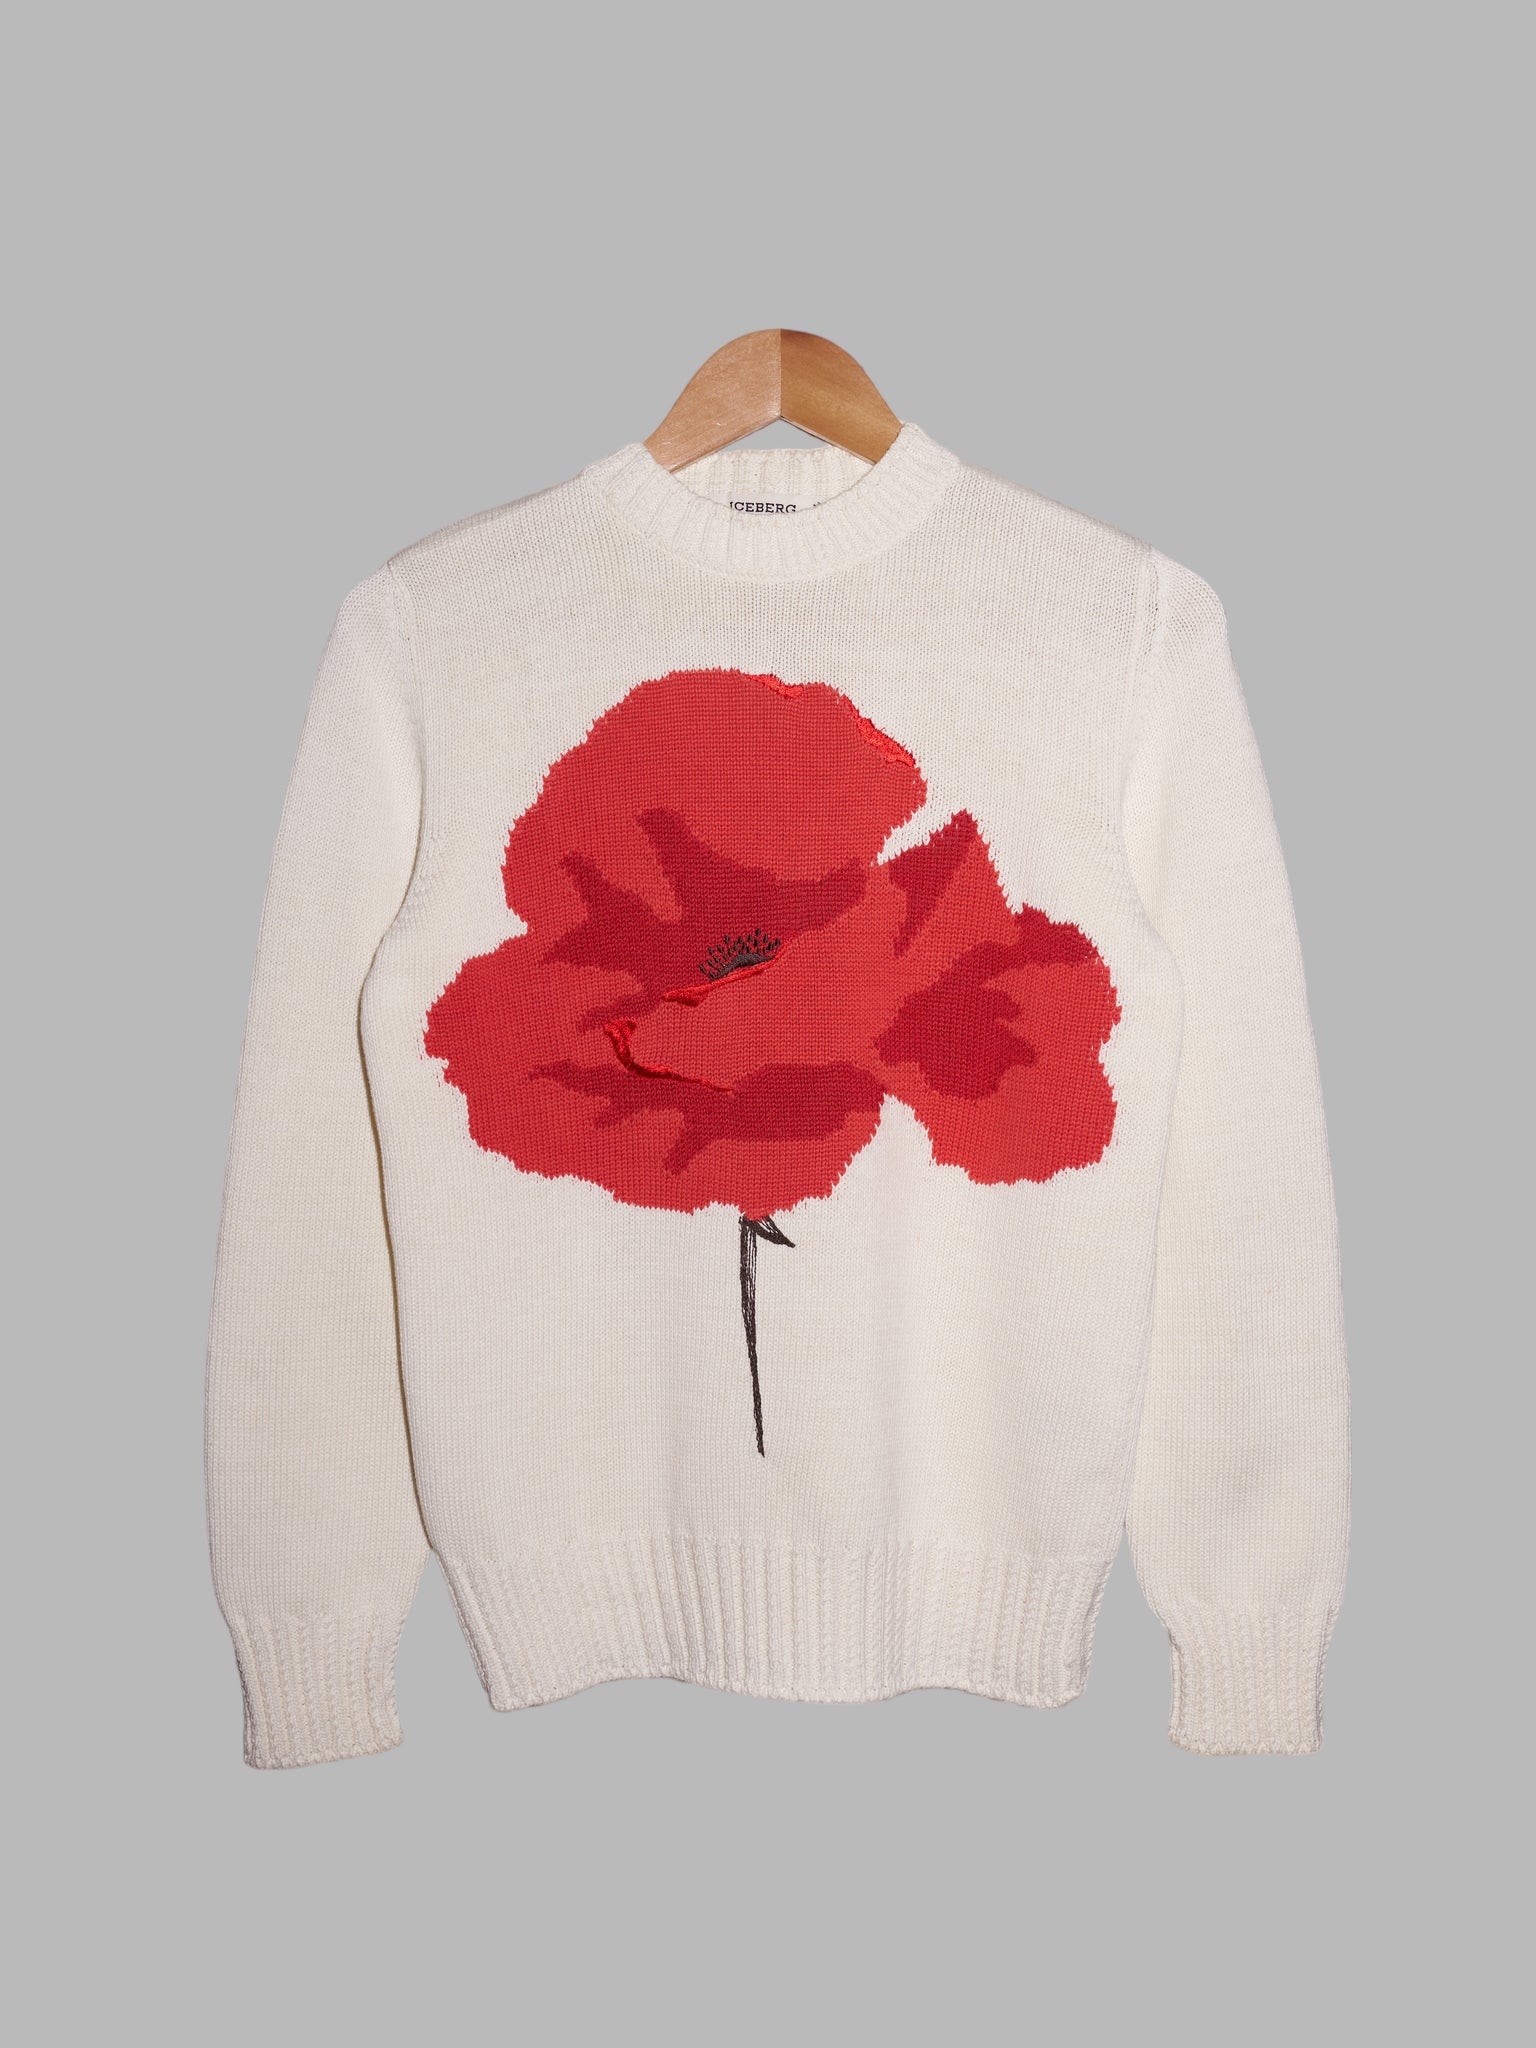 Iceberg cream knitted cotton mock neck jumper with red rose motif